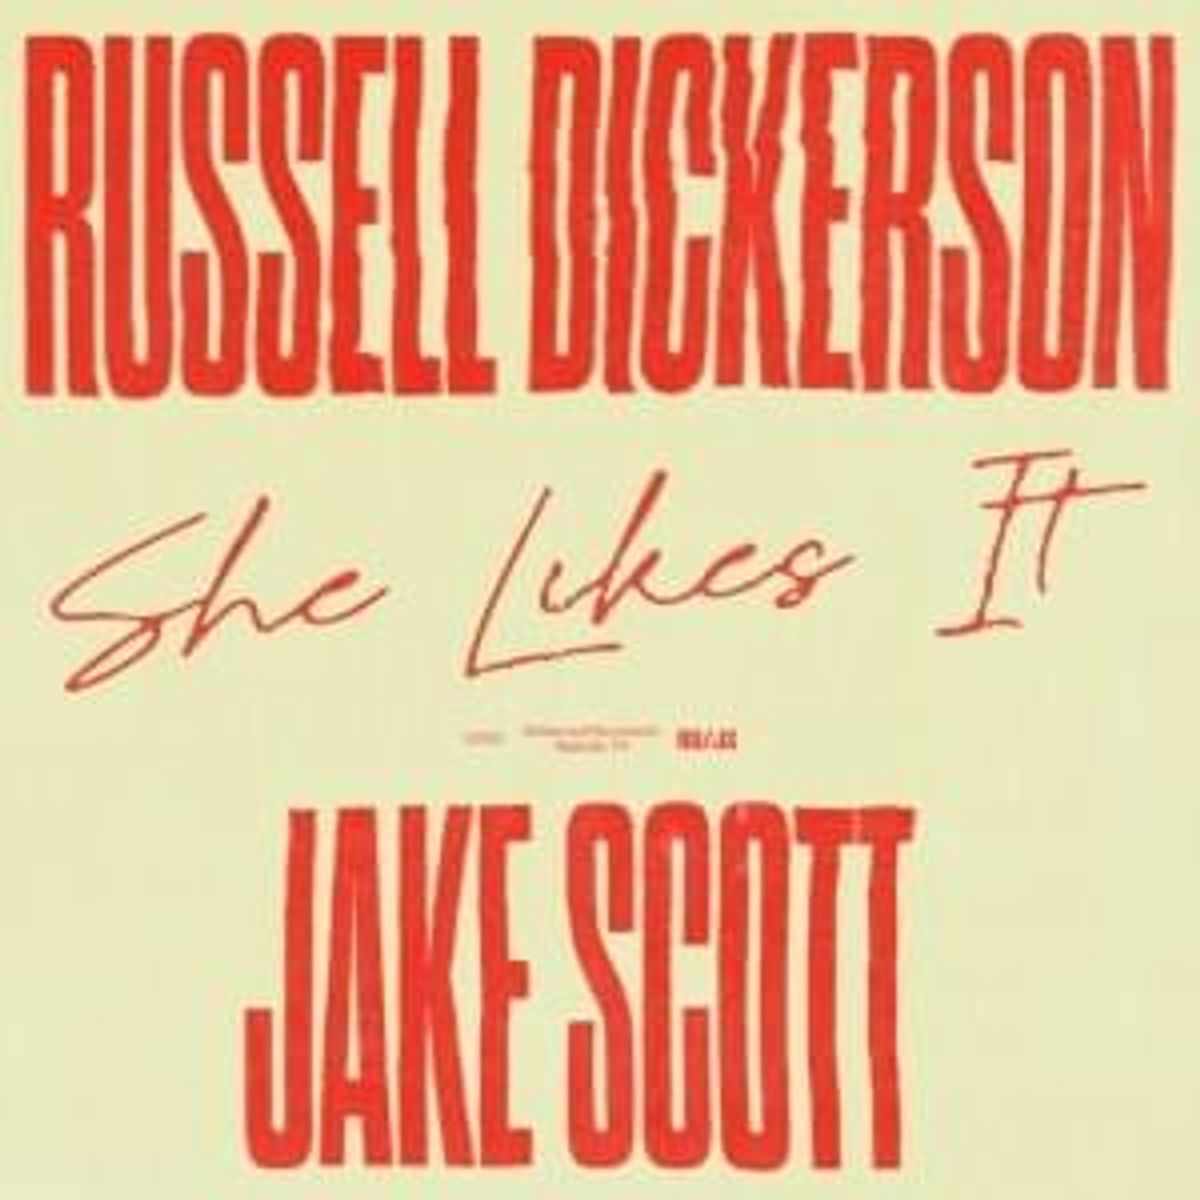 Russell Dickerson She Likes It